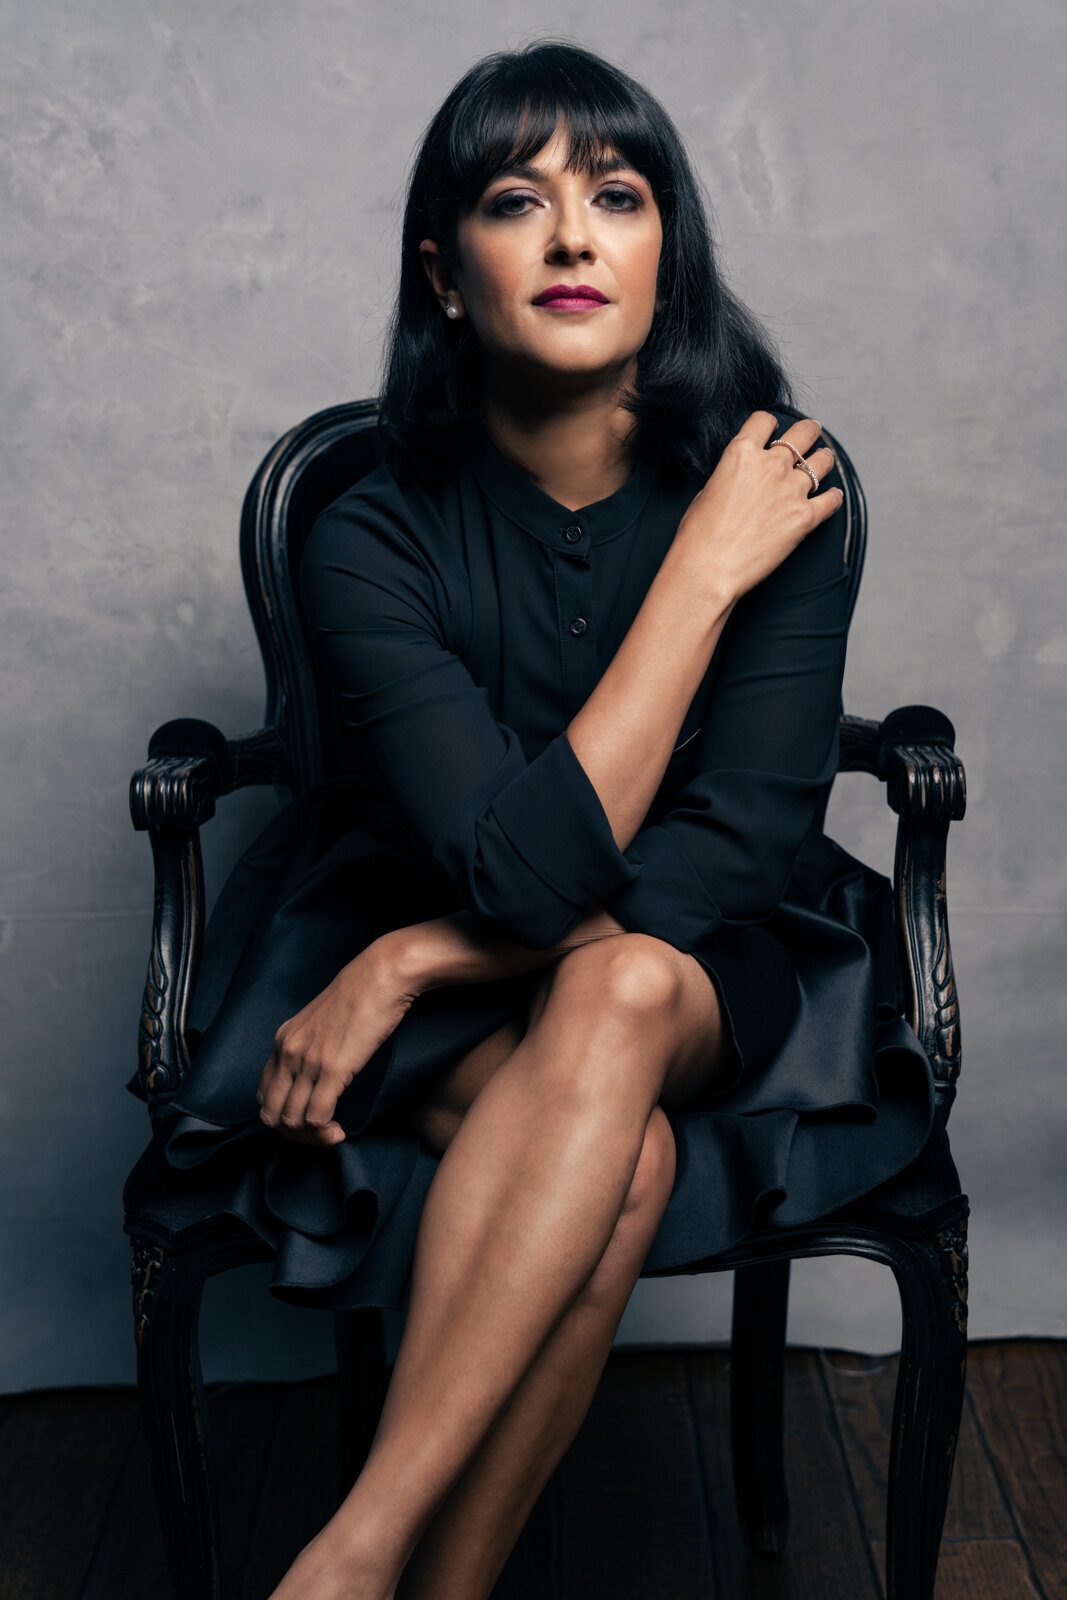 Picture on a young woman with dark hair, sitting on a chair in a black dress